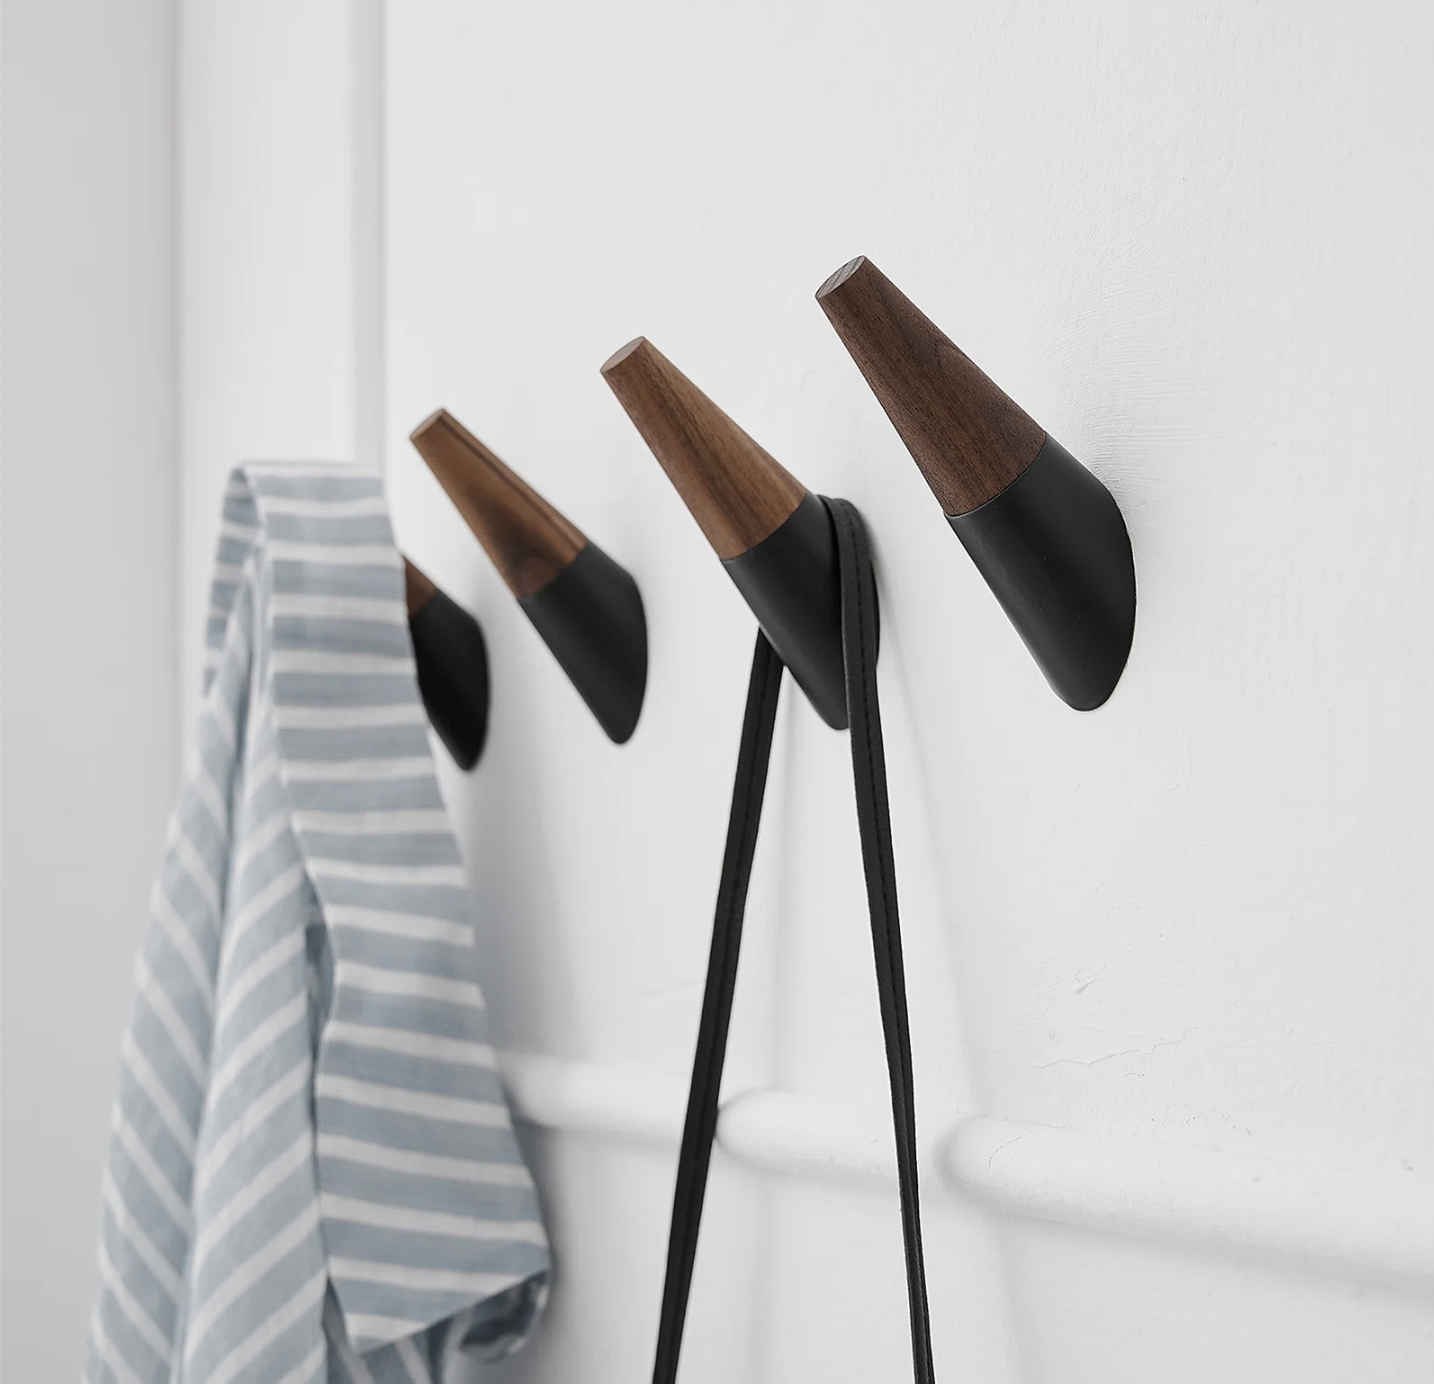 brown and black towel hooks mounted on white door